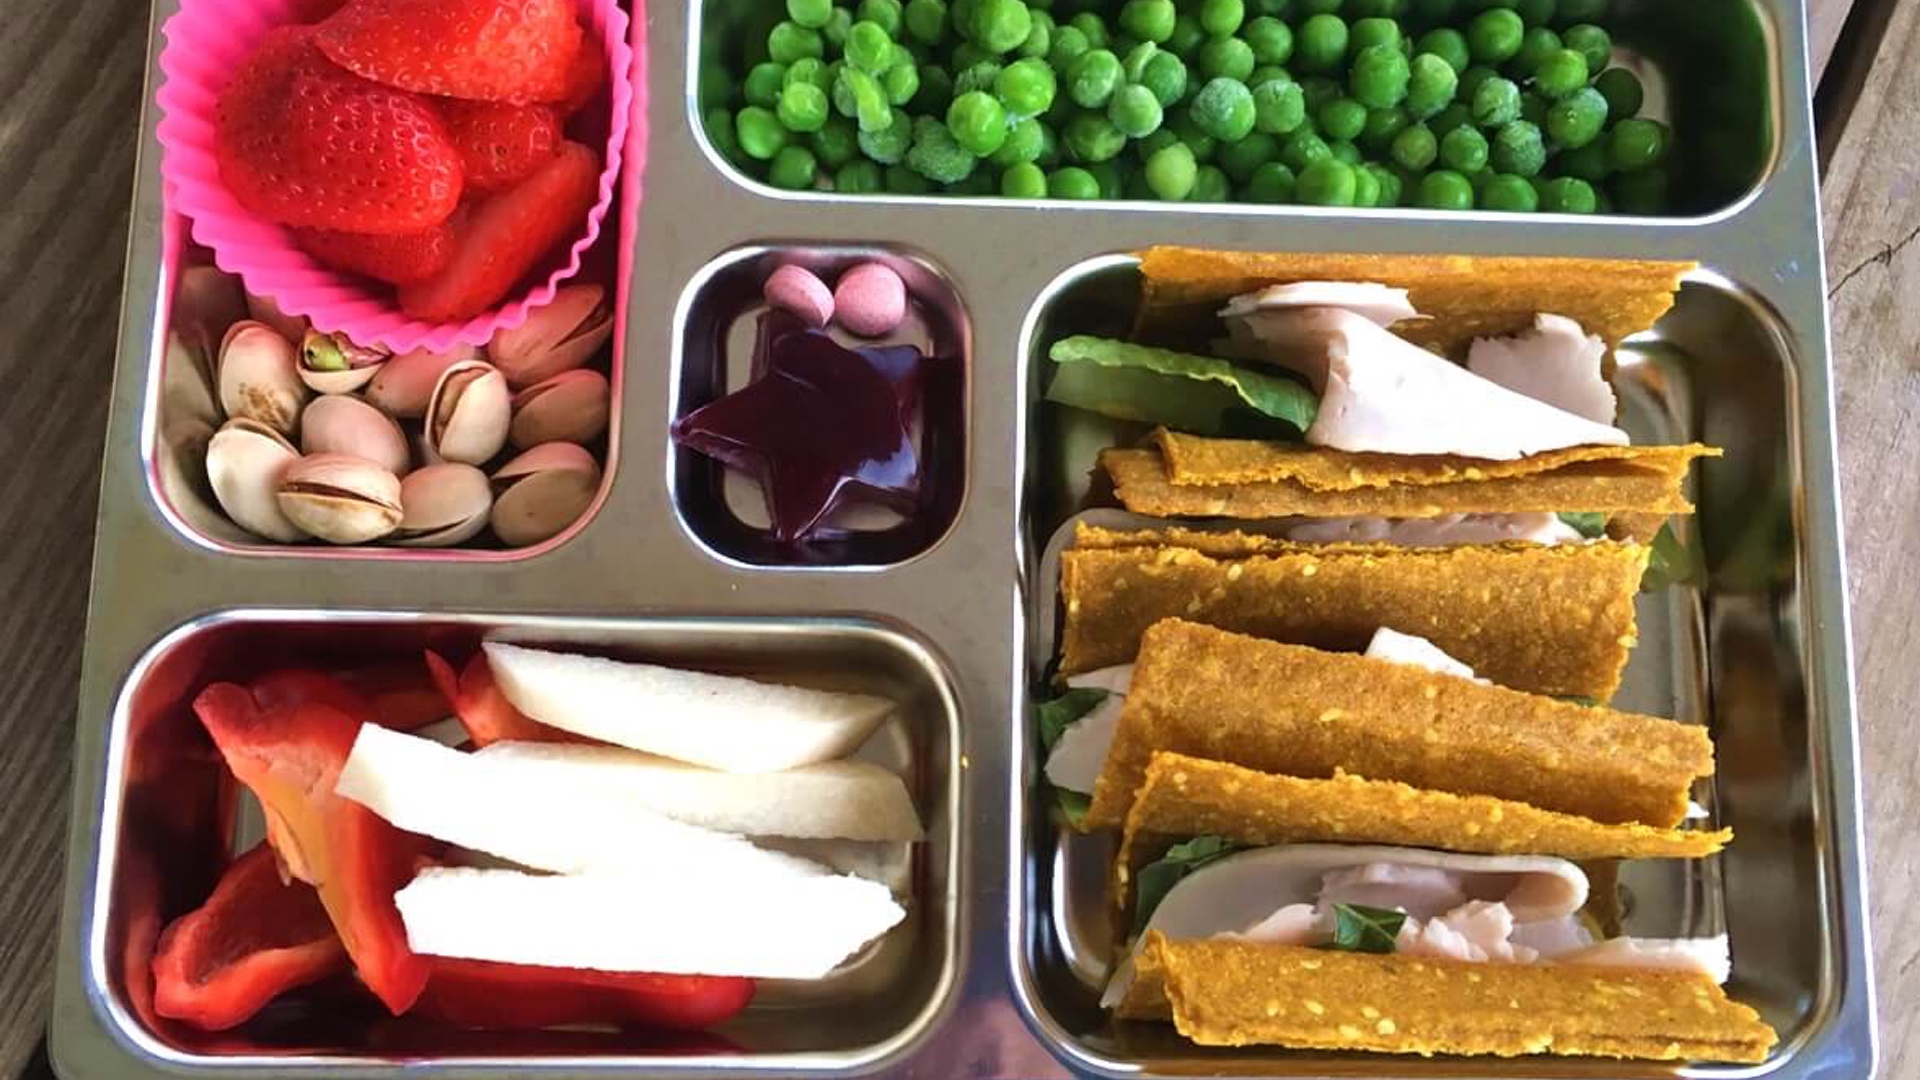 20 Hot School Lunch Ideas for Kids - Thermos Tips & Tricks